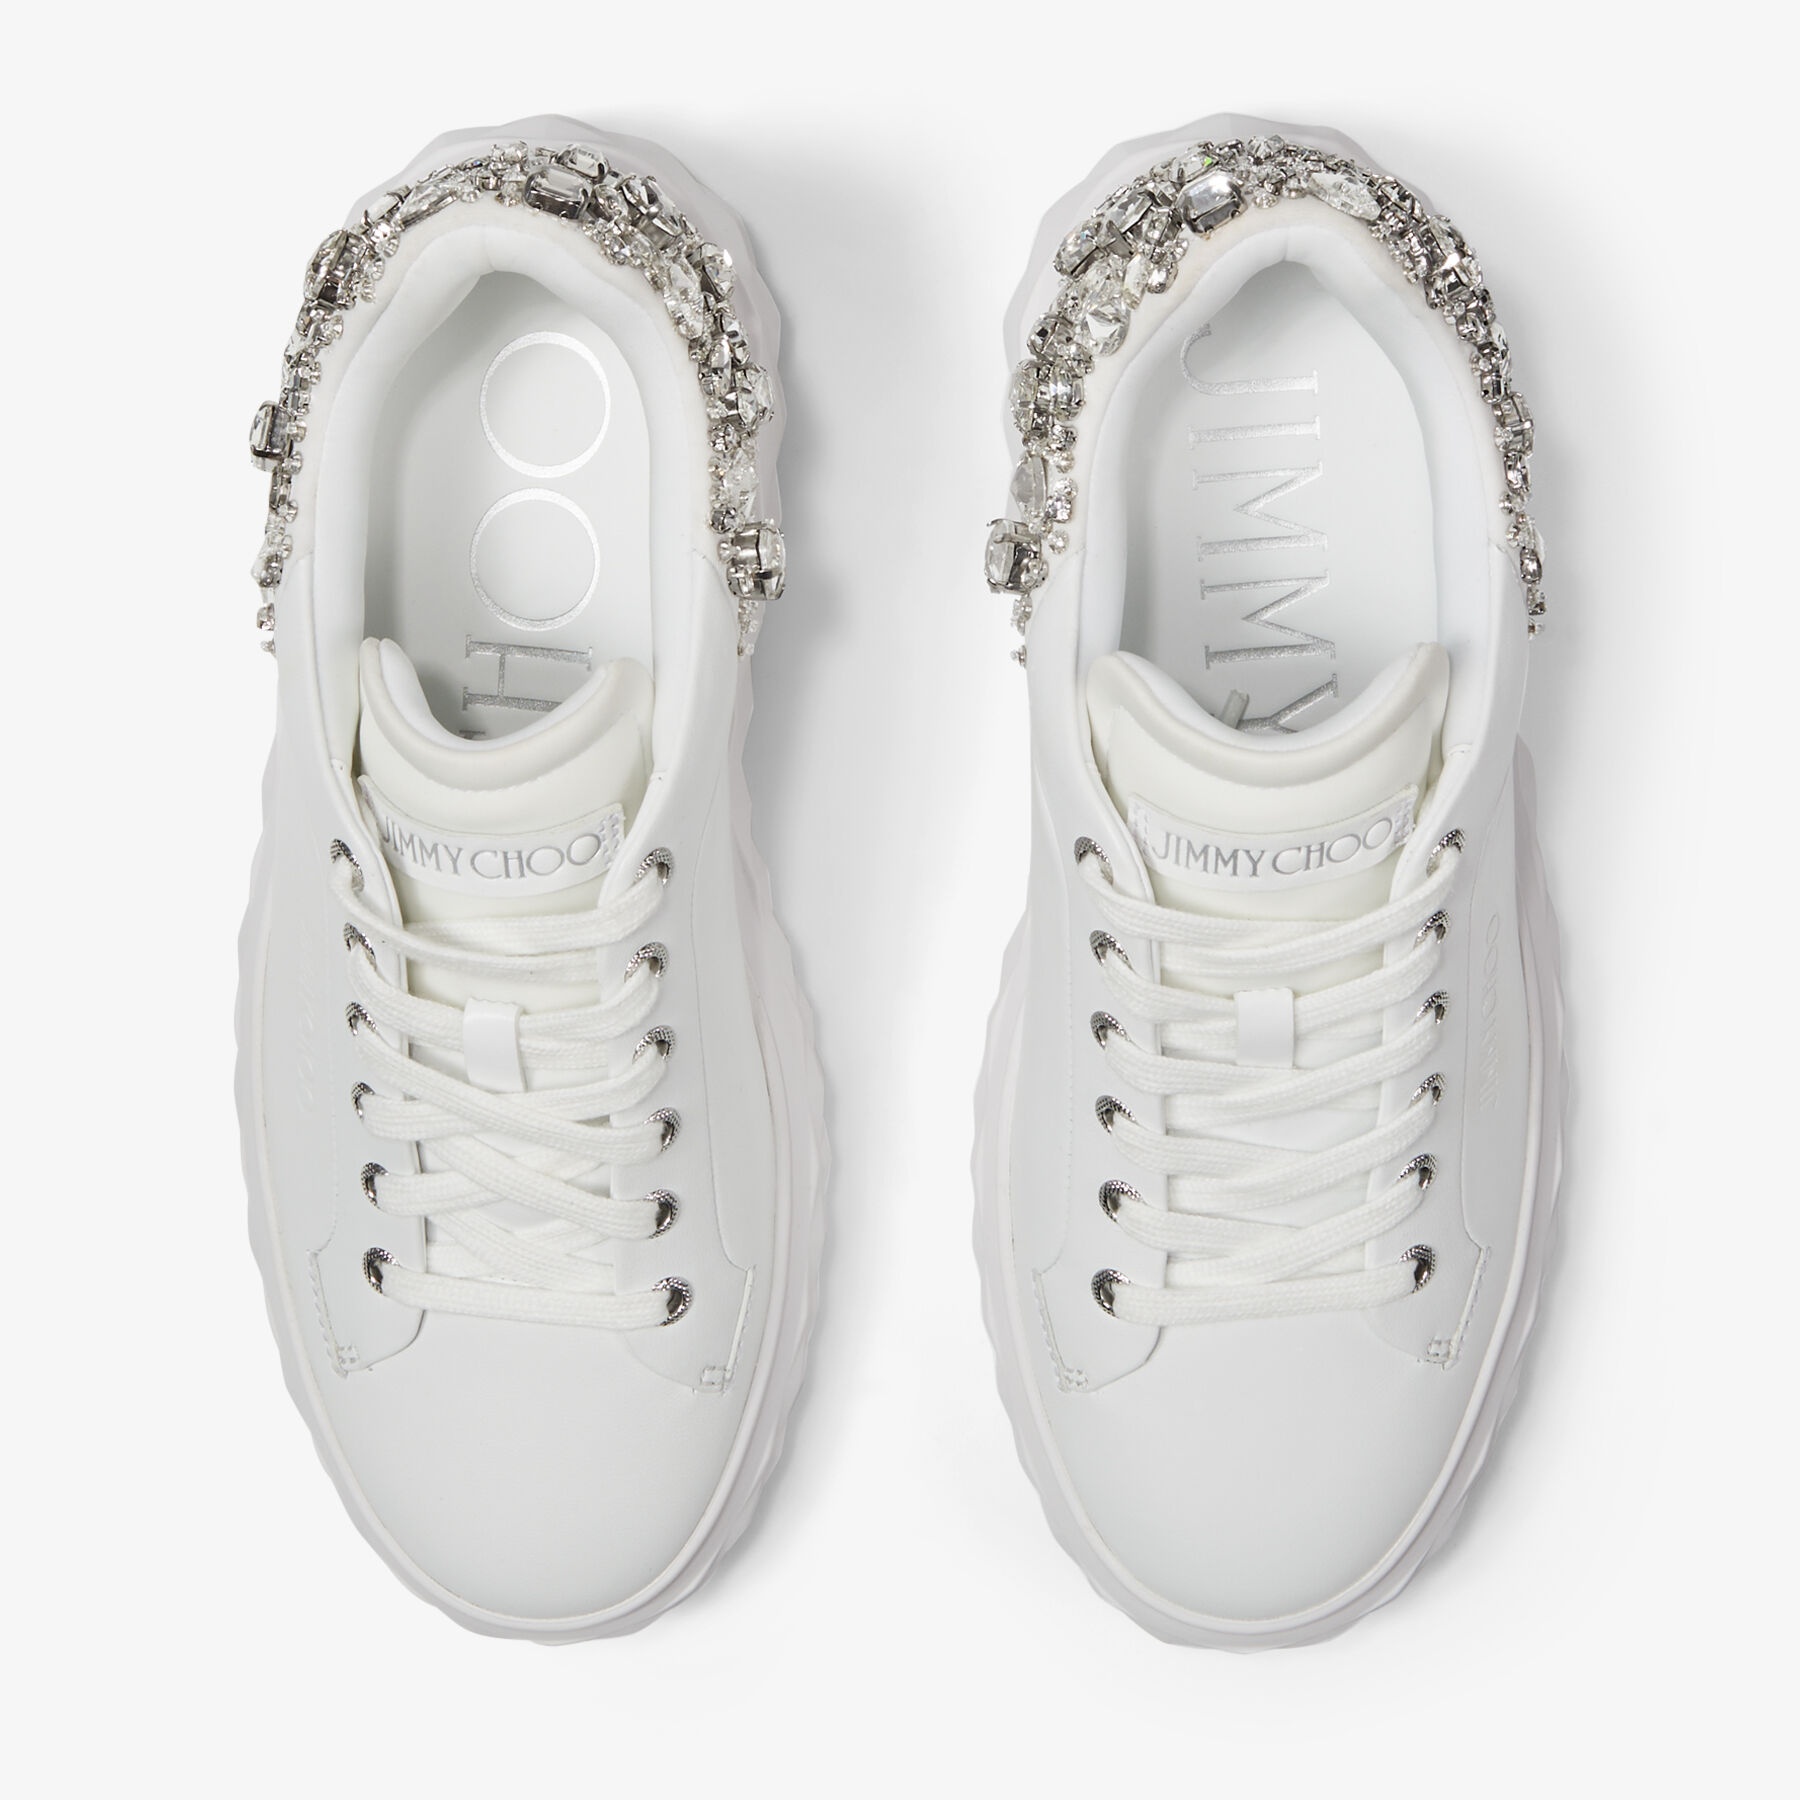 Diamond Maxi/f Ii
White and Silver Nappa Leather Trainers with Crystals - 5